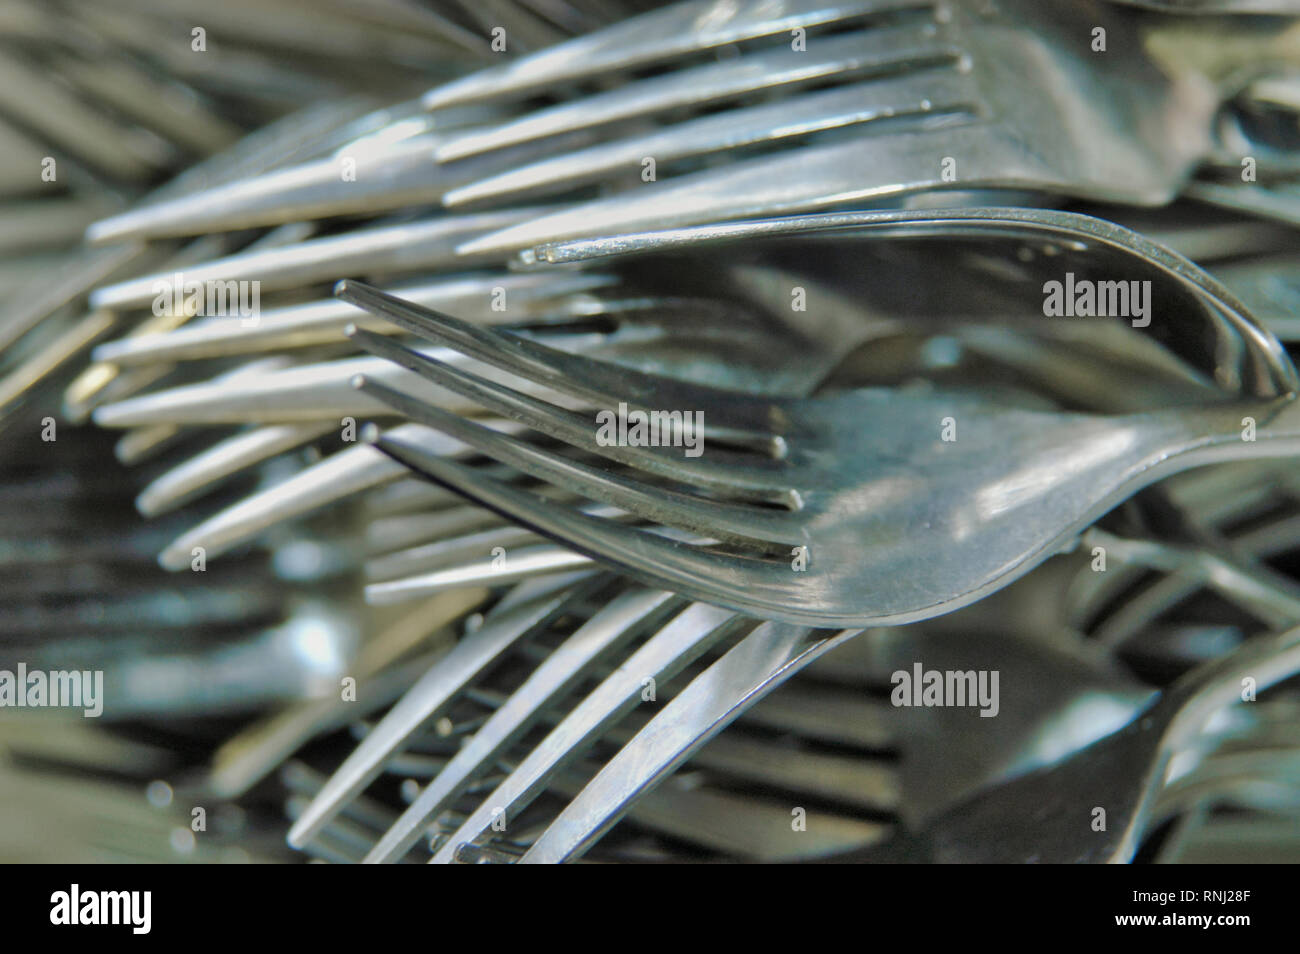 Bunch of forks Stock Photo